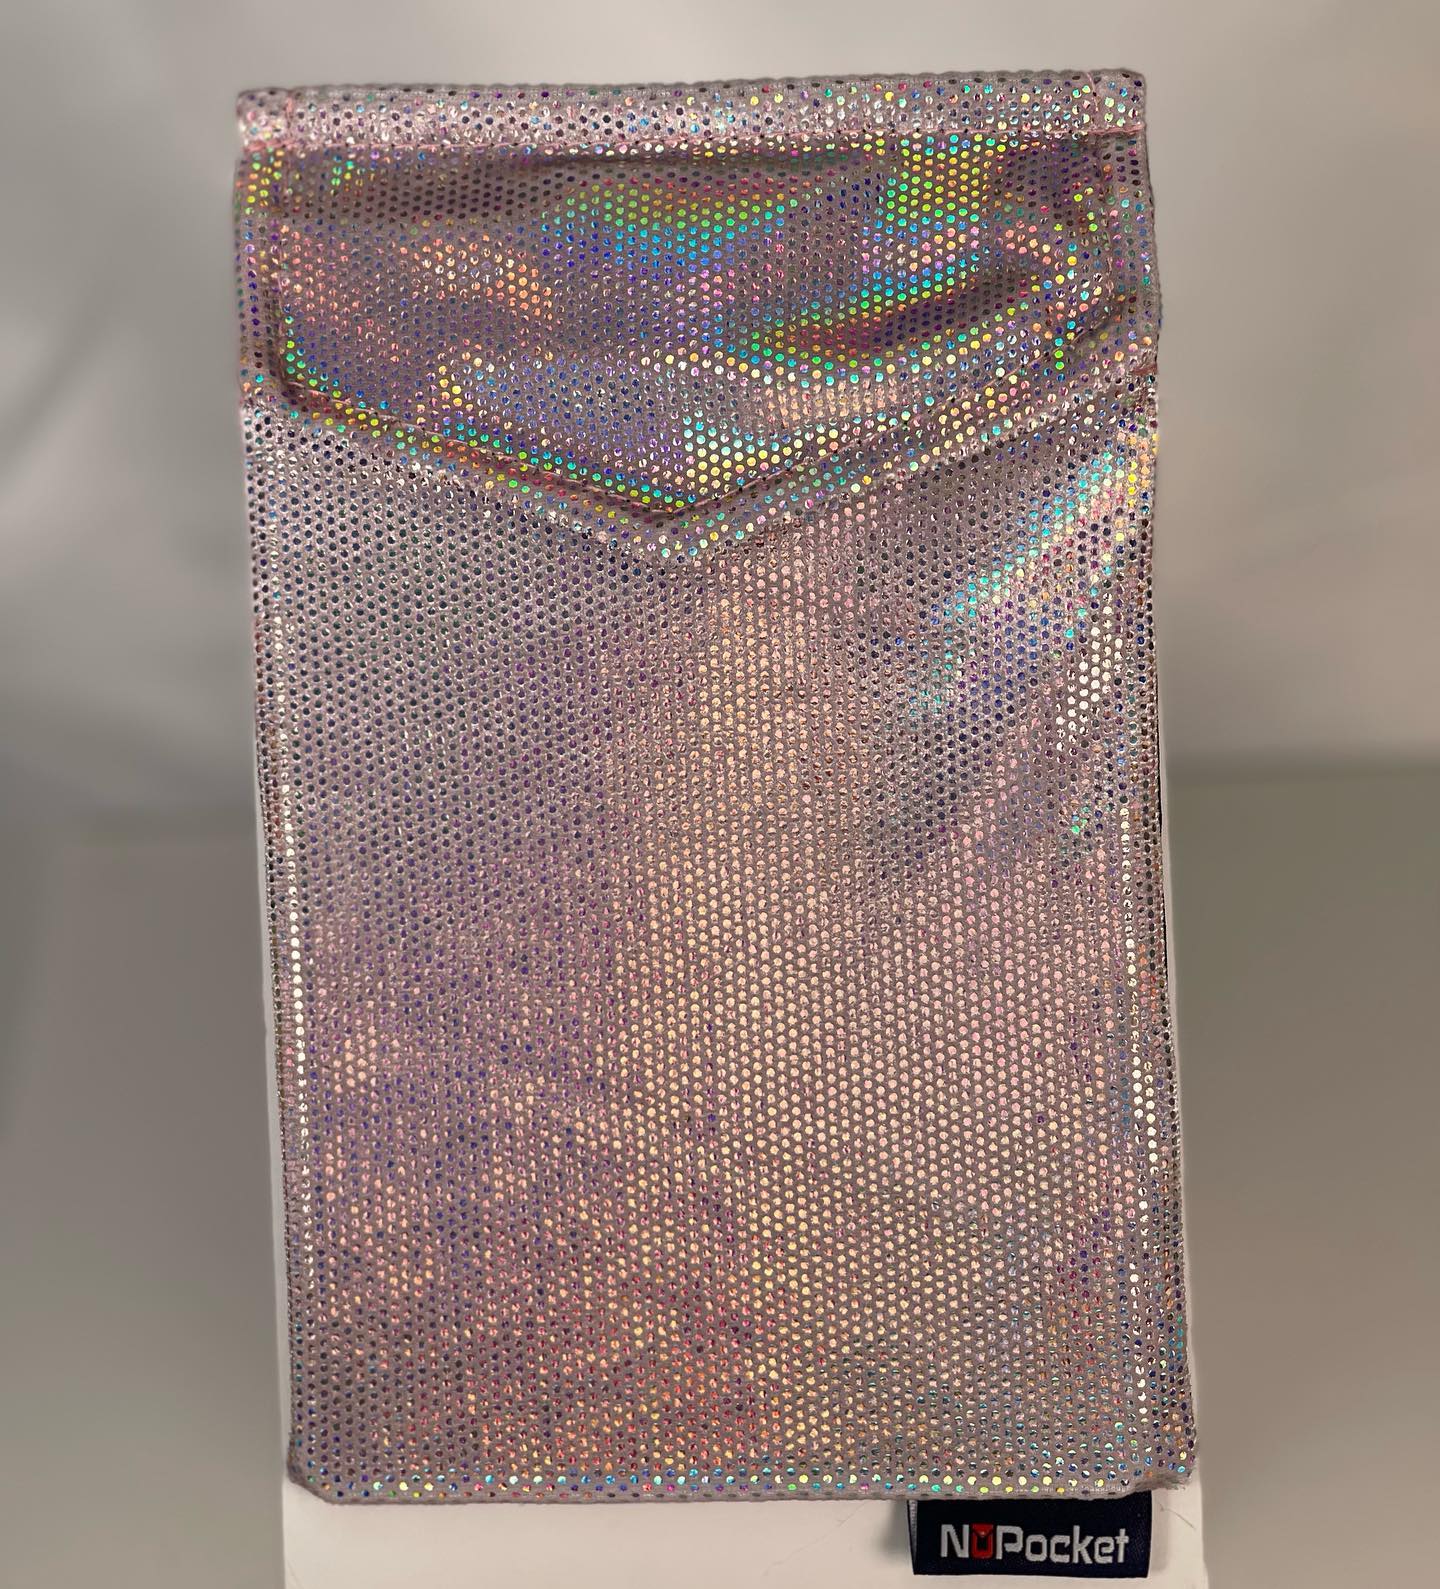 6" x 7" NuPocket Classic - Pink Holographic